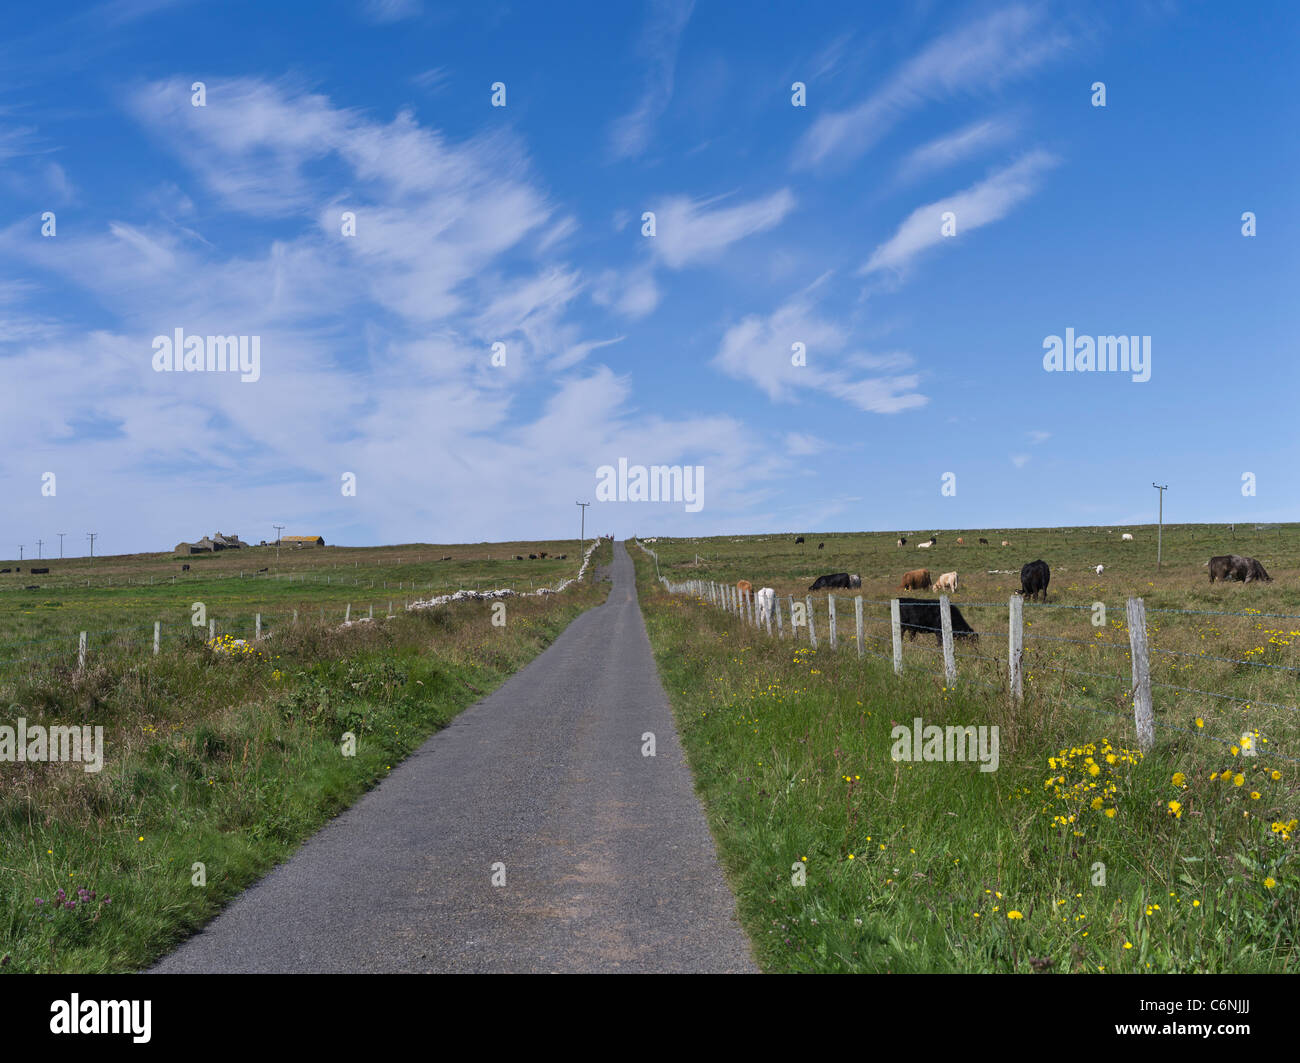 dh  PAPA WESTRAY ORKNEY Open country road nobody cottage and field of cows countrylane empty roads uk islands summer Stock Photo